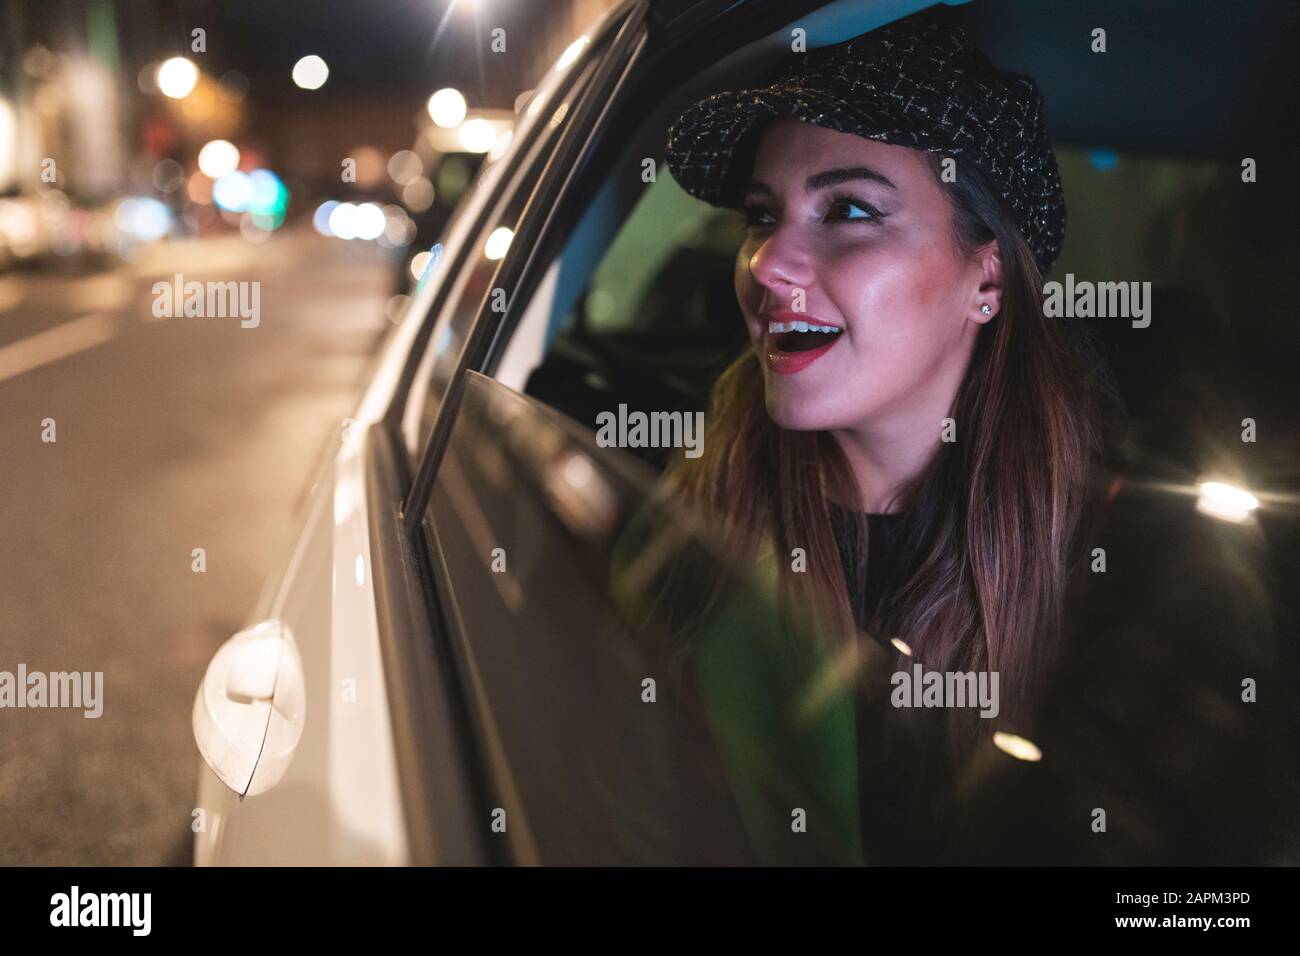 Woman sitting on the backseat of a car in the city at night, looking out of the car window Stock Photo